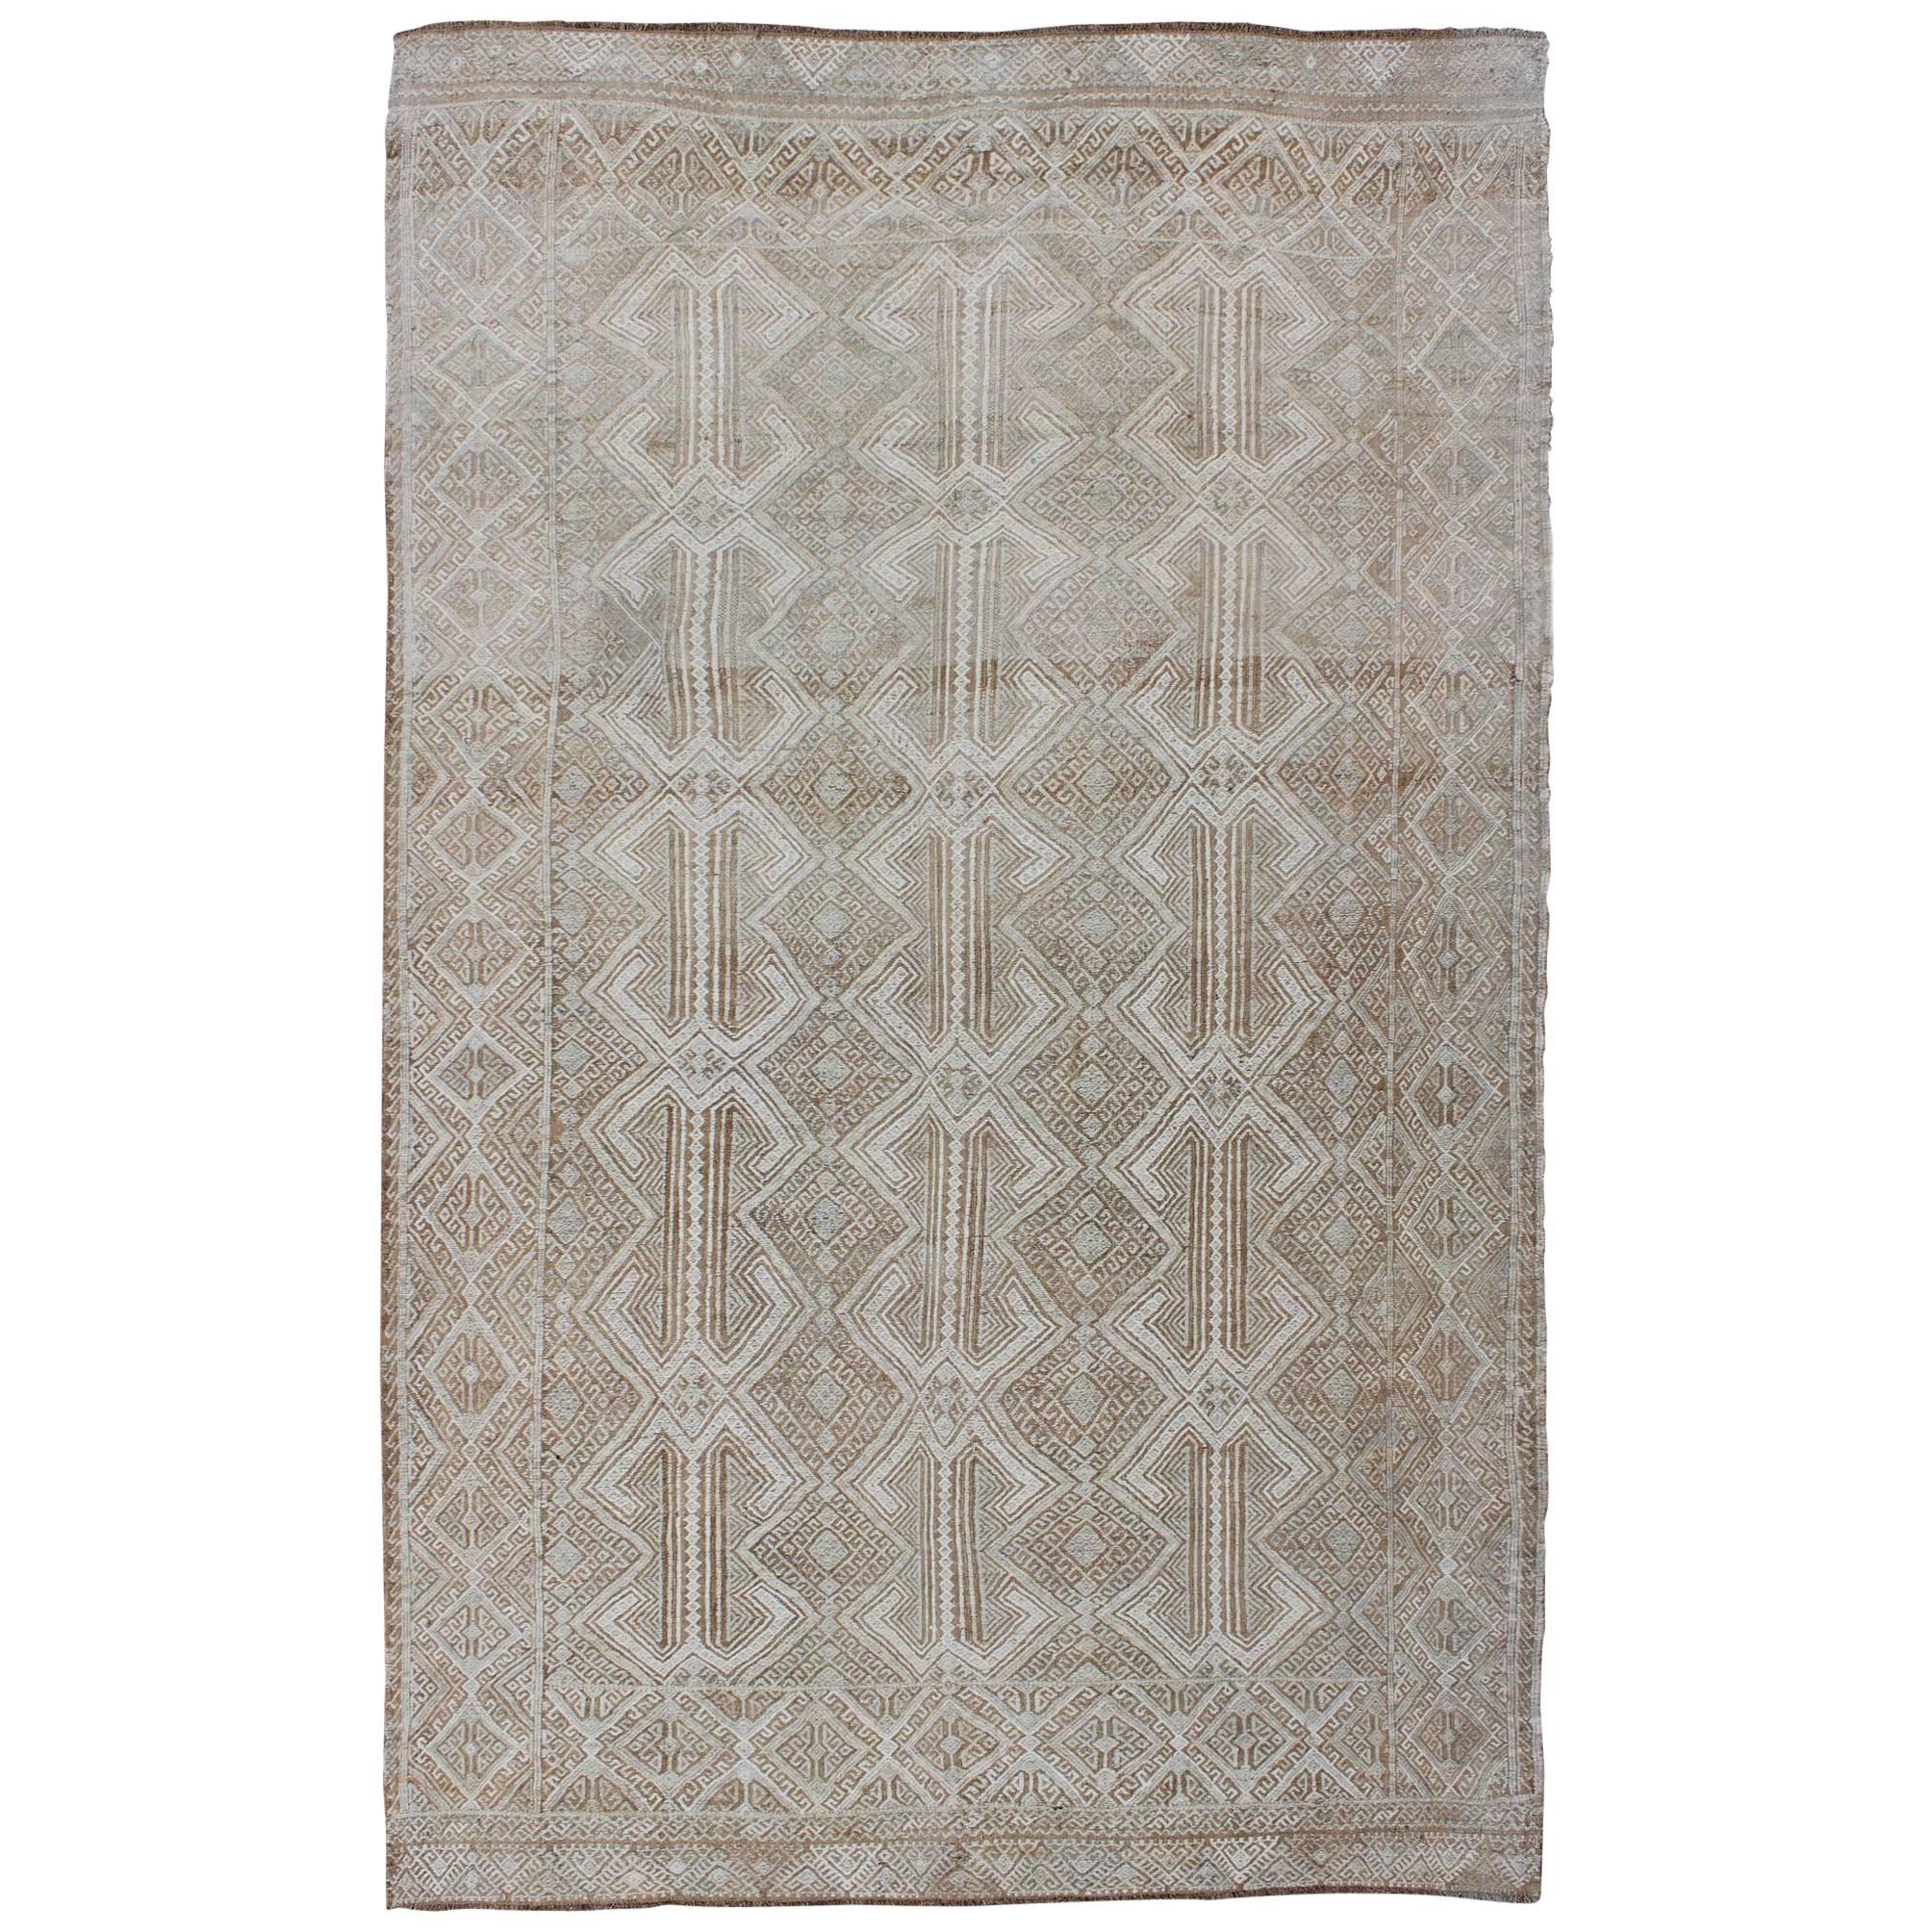 Midcentury Turkish Embroidered Flat Weave with All-Over Geometric Design  For Sale